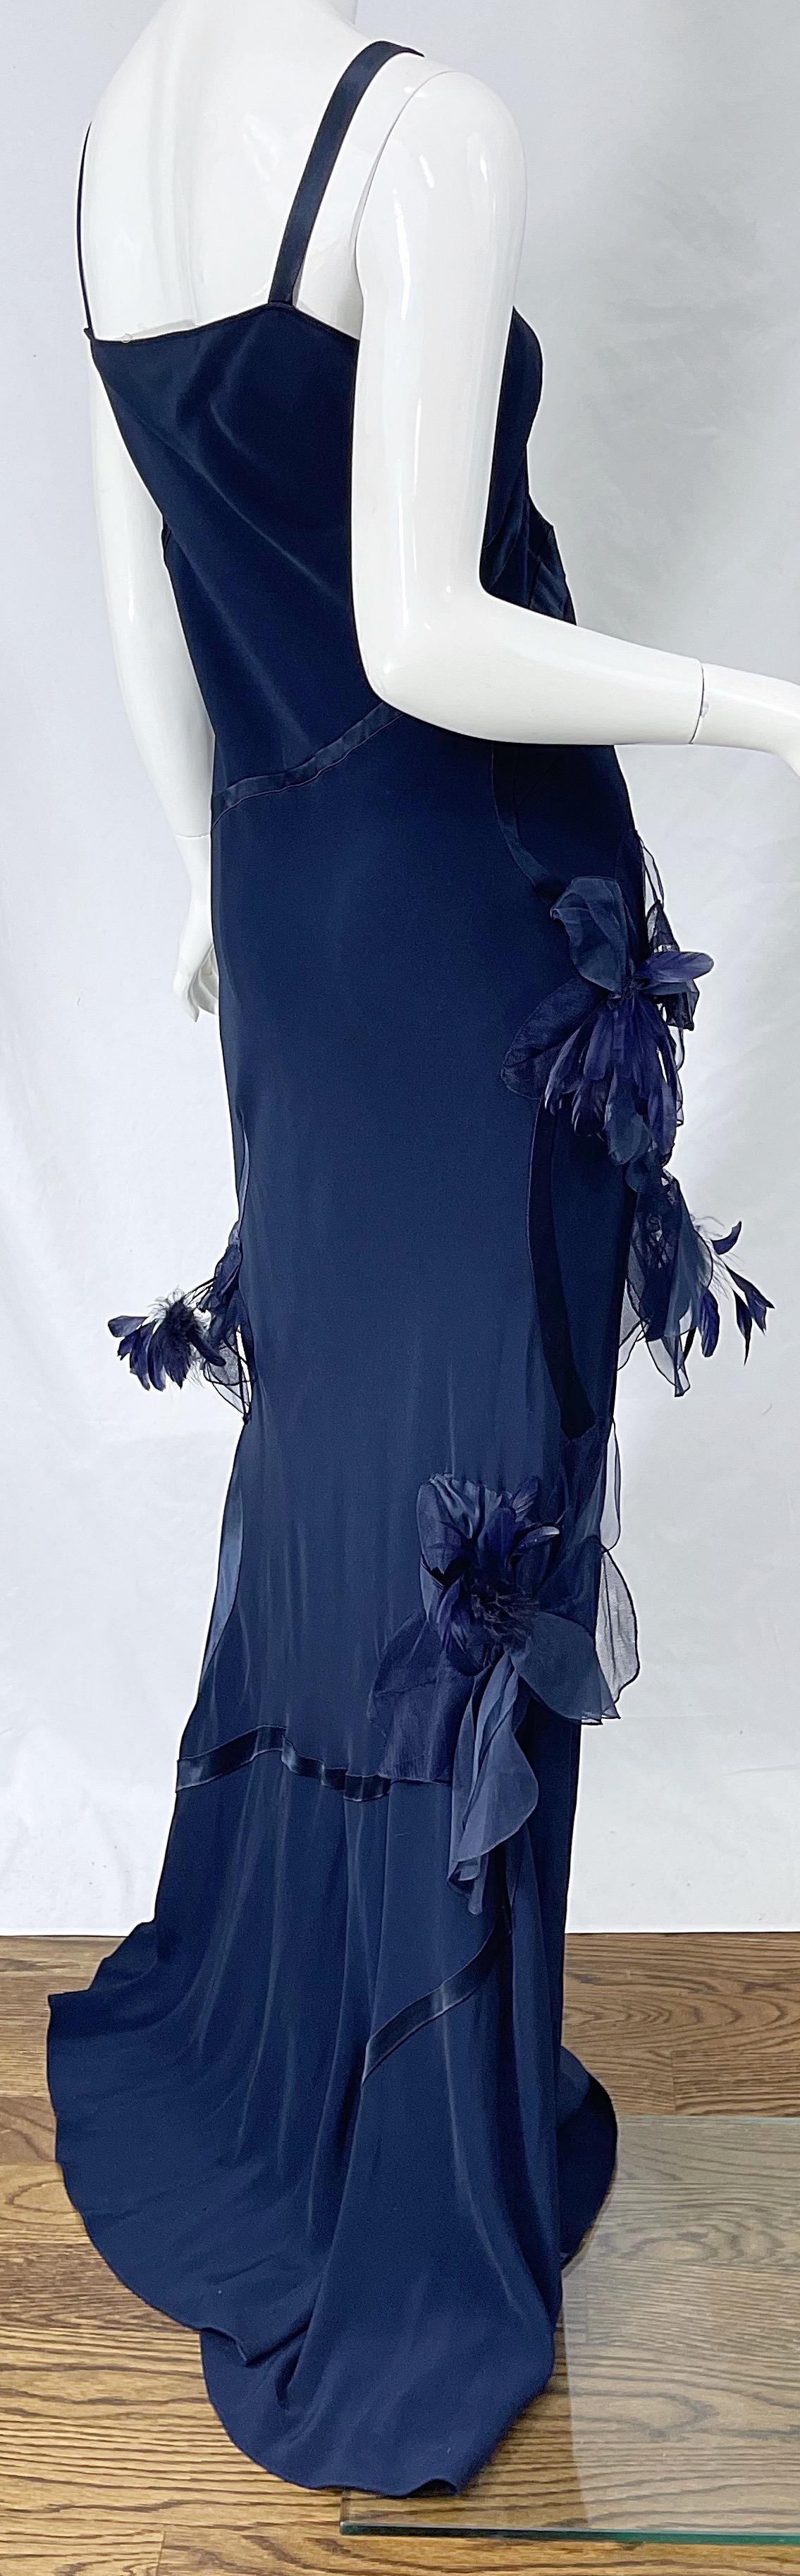 NWT John Galliano Size 10 Early 2000s Navy Blue Feather Silk / Satin Gown Dress 2